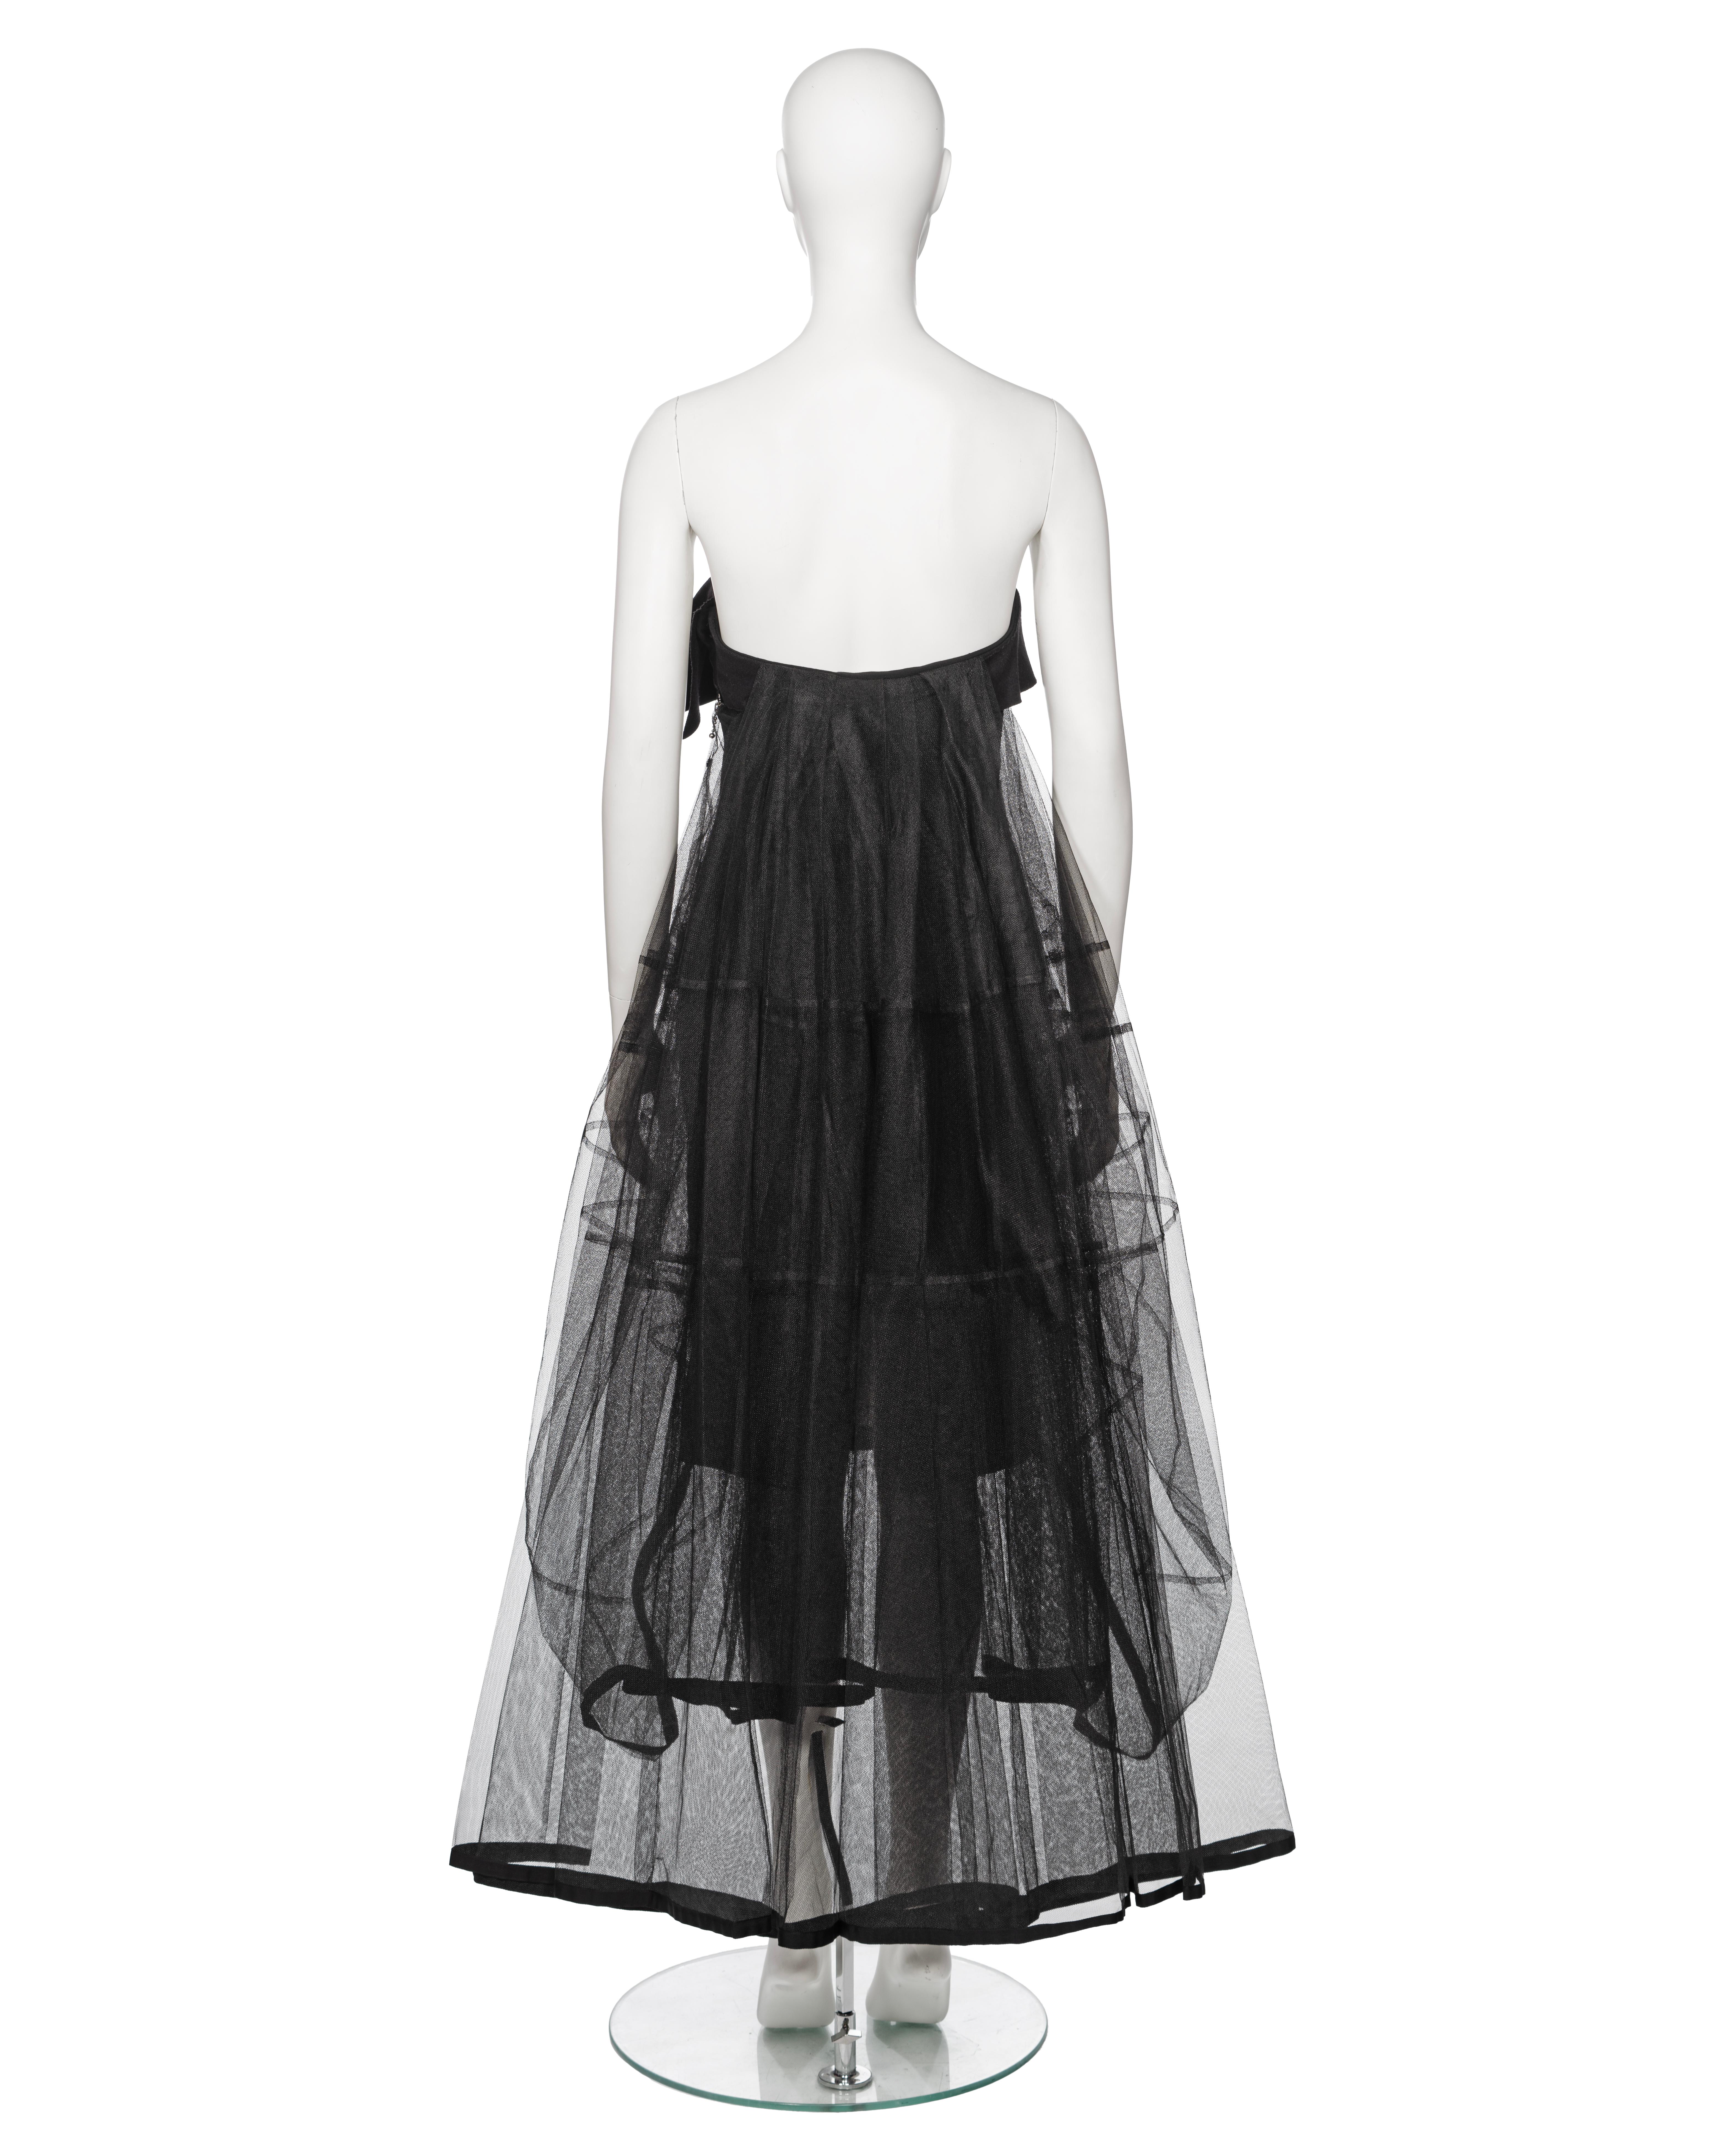 Louis Vuitton by Marc Jacobs Black Wool Strapless Dress with Petticoat, fw 2008 For Sale 8